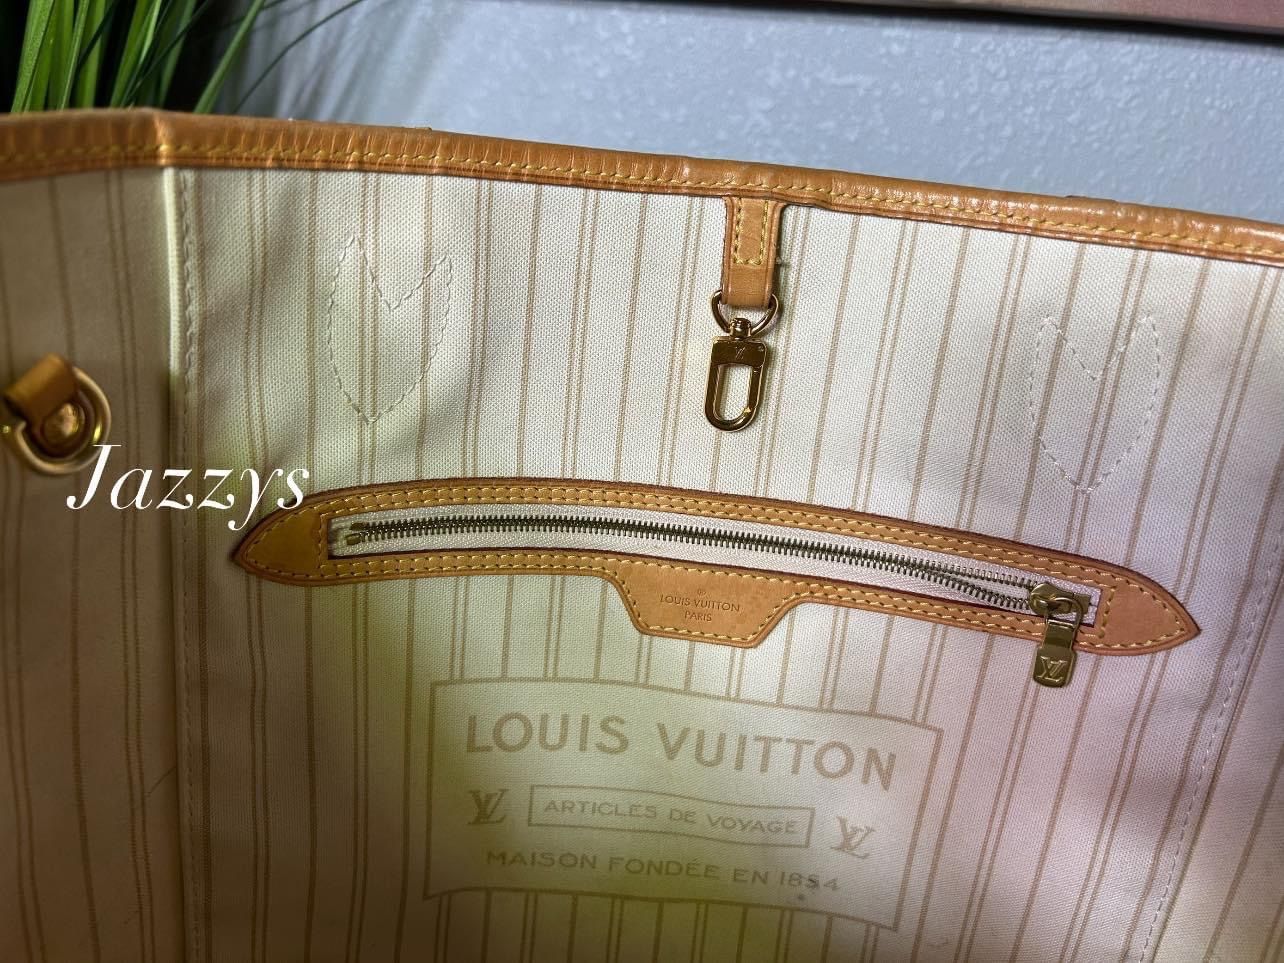 Authentic Louis Vuitton NEVERFULL mm for Sale in San Antonio, TX - OfferUp